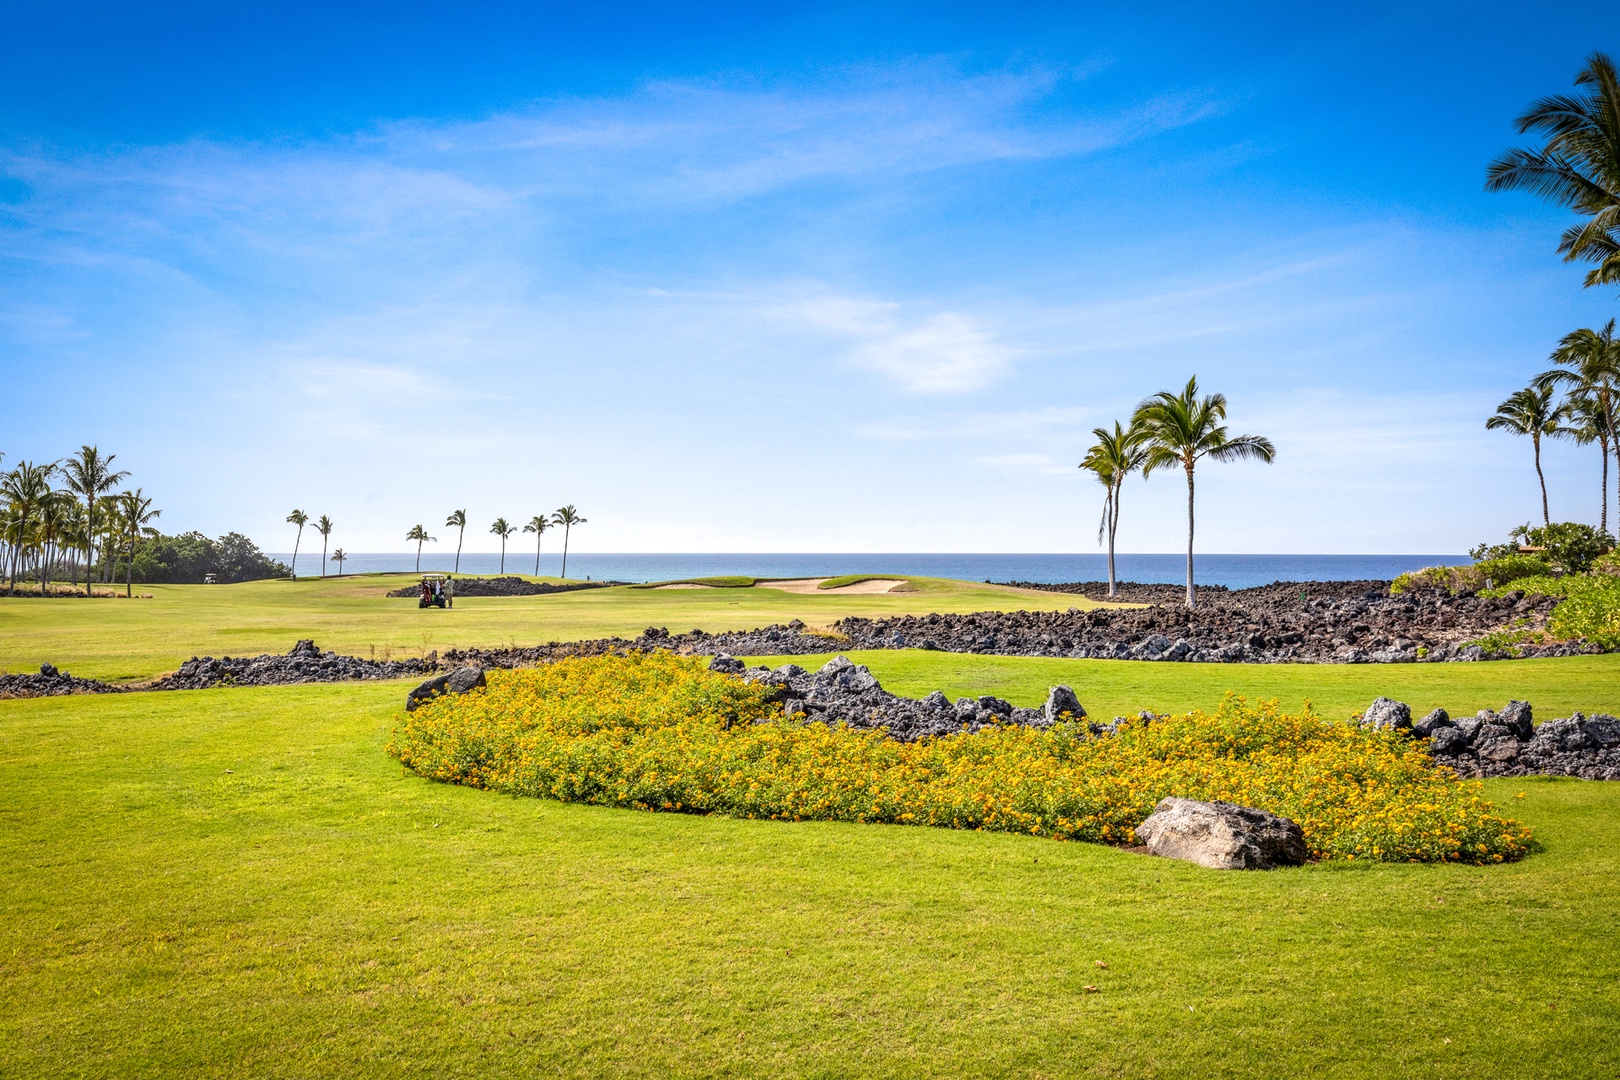 Waikoloa Vacation Rentals, 2BD Hali'i Kai 12C at Waikoloa Resort - Your private lanai steps out to a grassy lawn, perfect for small children and anyone who appreciates extra outdoor space.